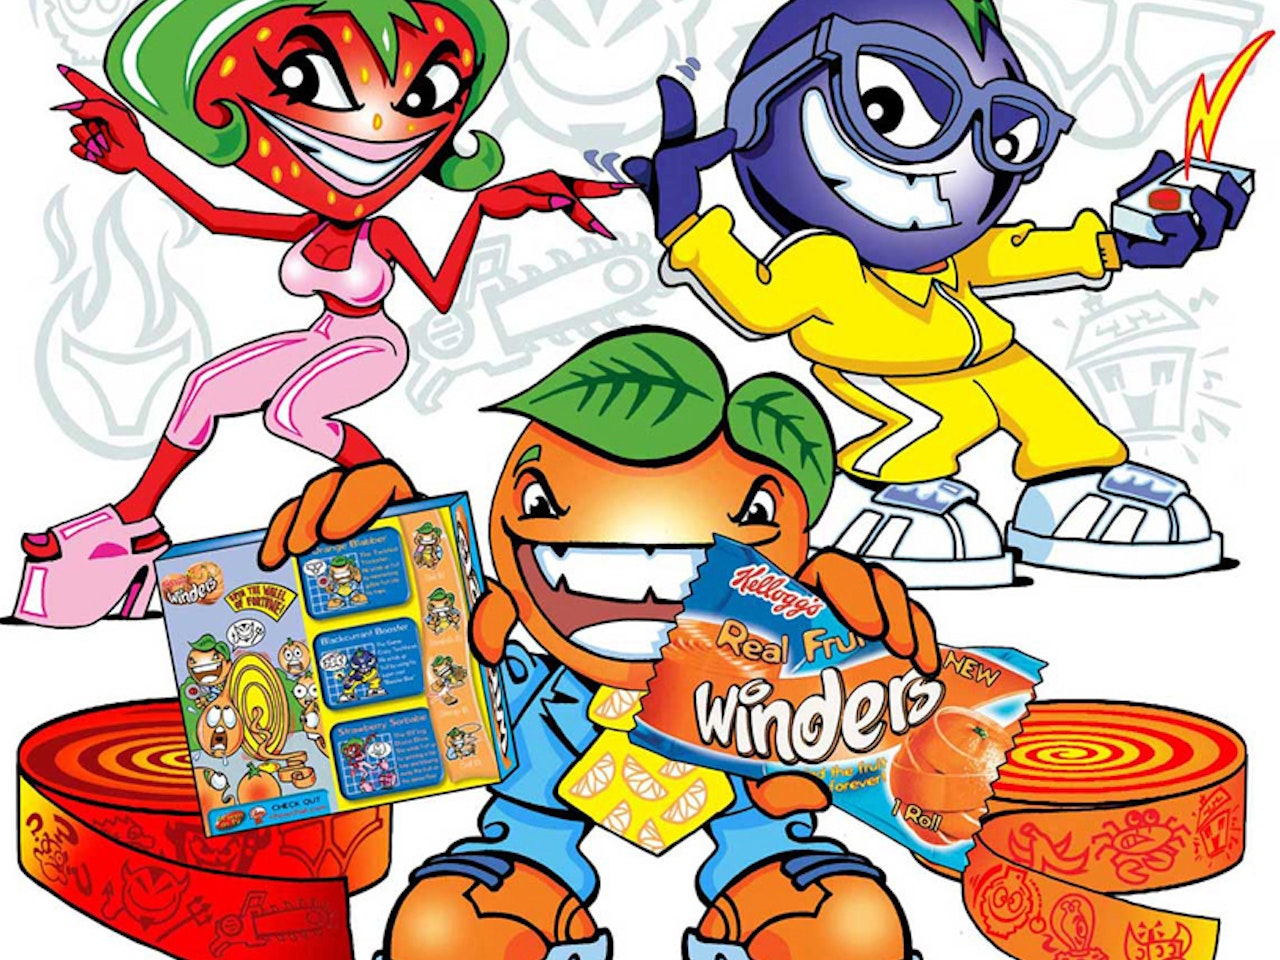 Kelloggs Fruit Winders gang  packaging design Cool friendly funny Funky Happy manga anime childrens cartoon comic strip Book cover illustration animation